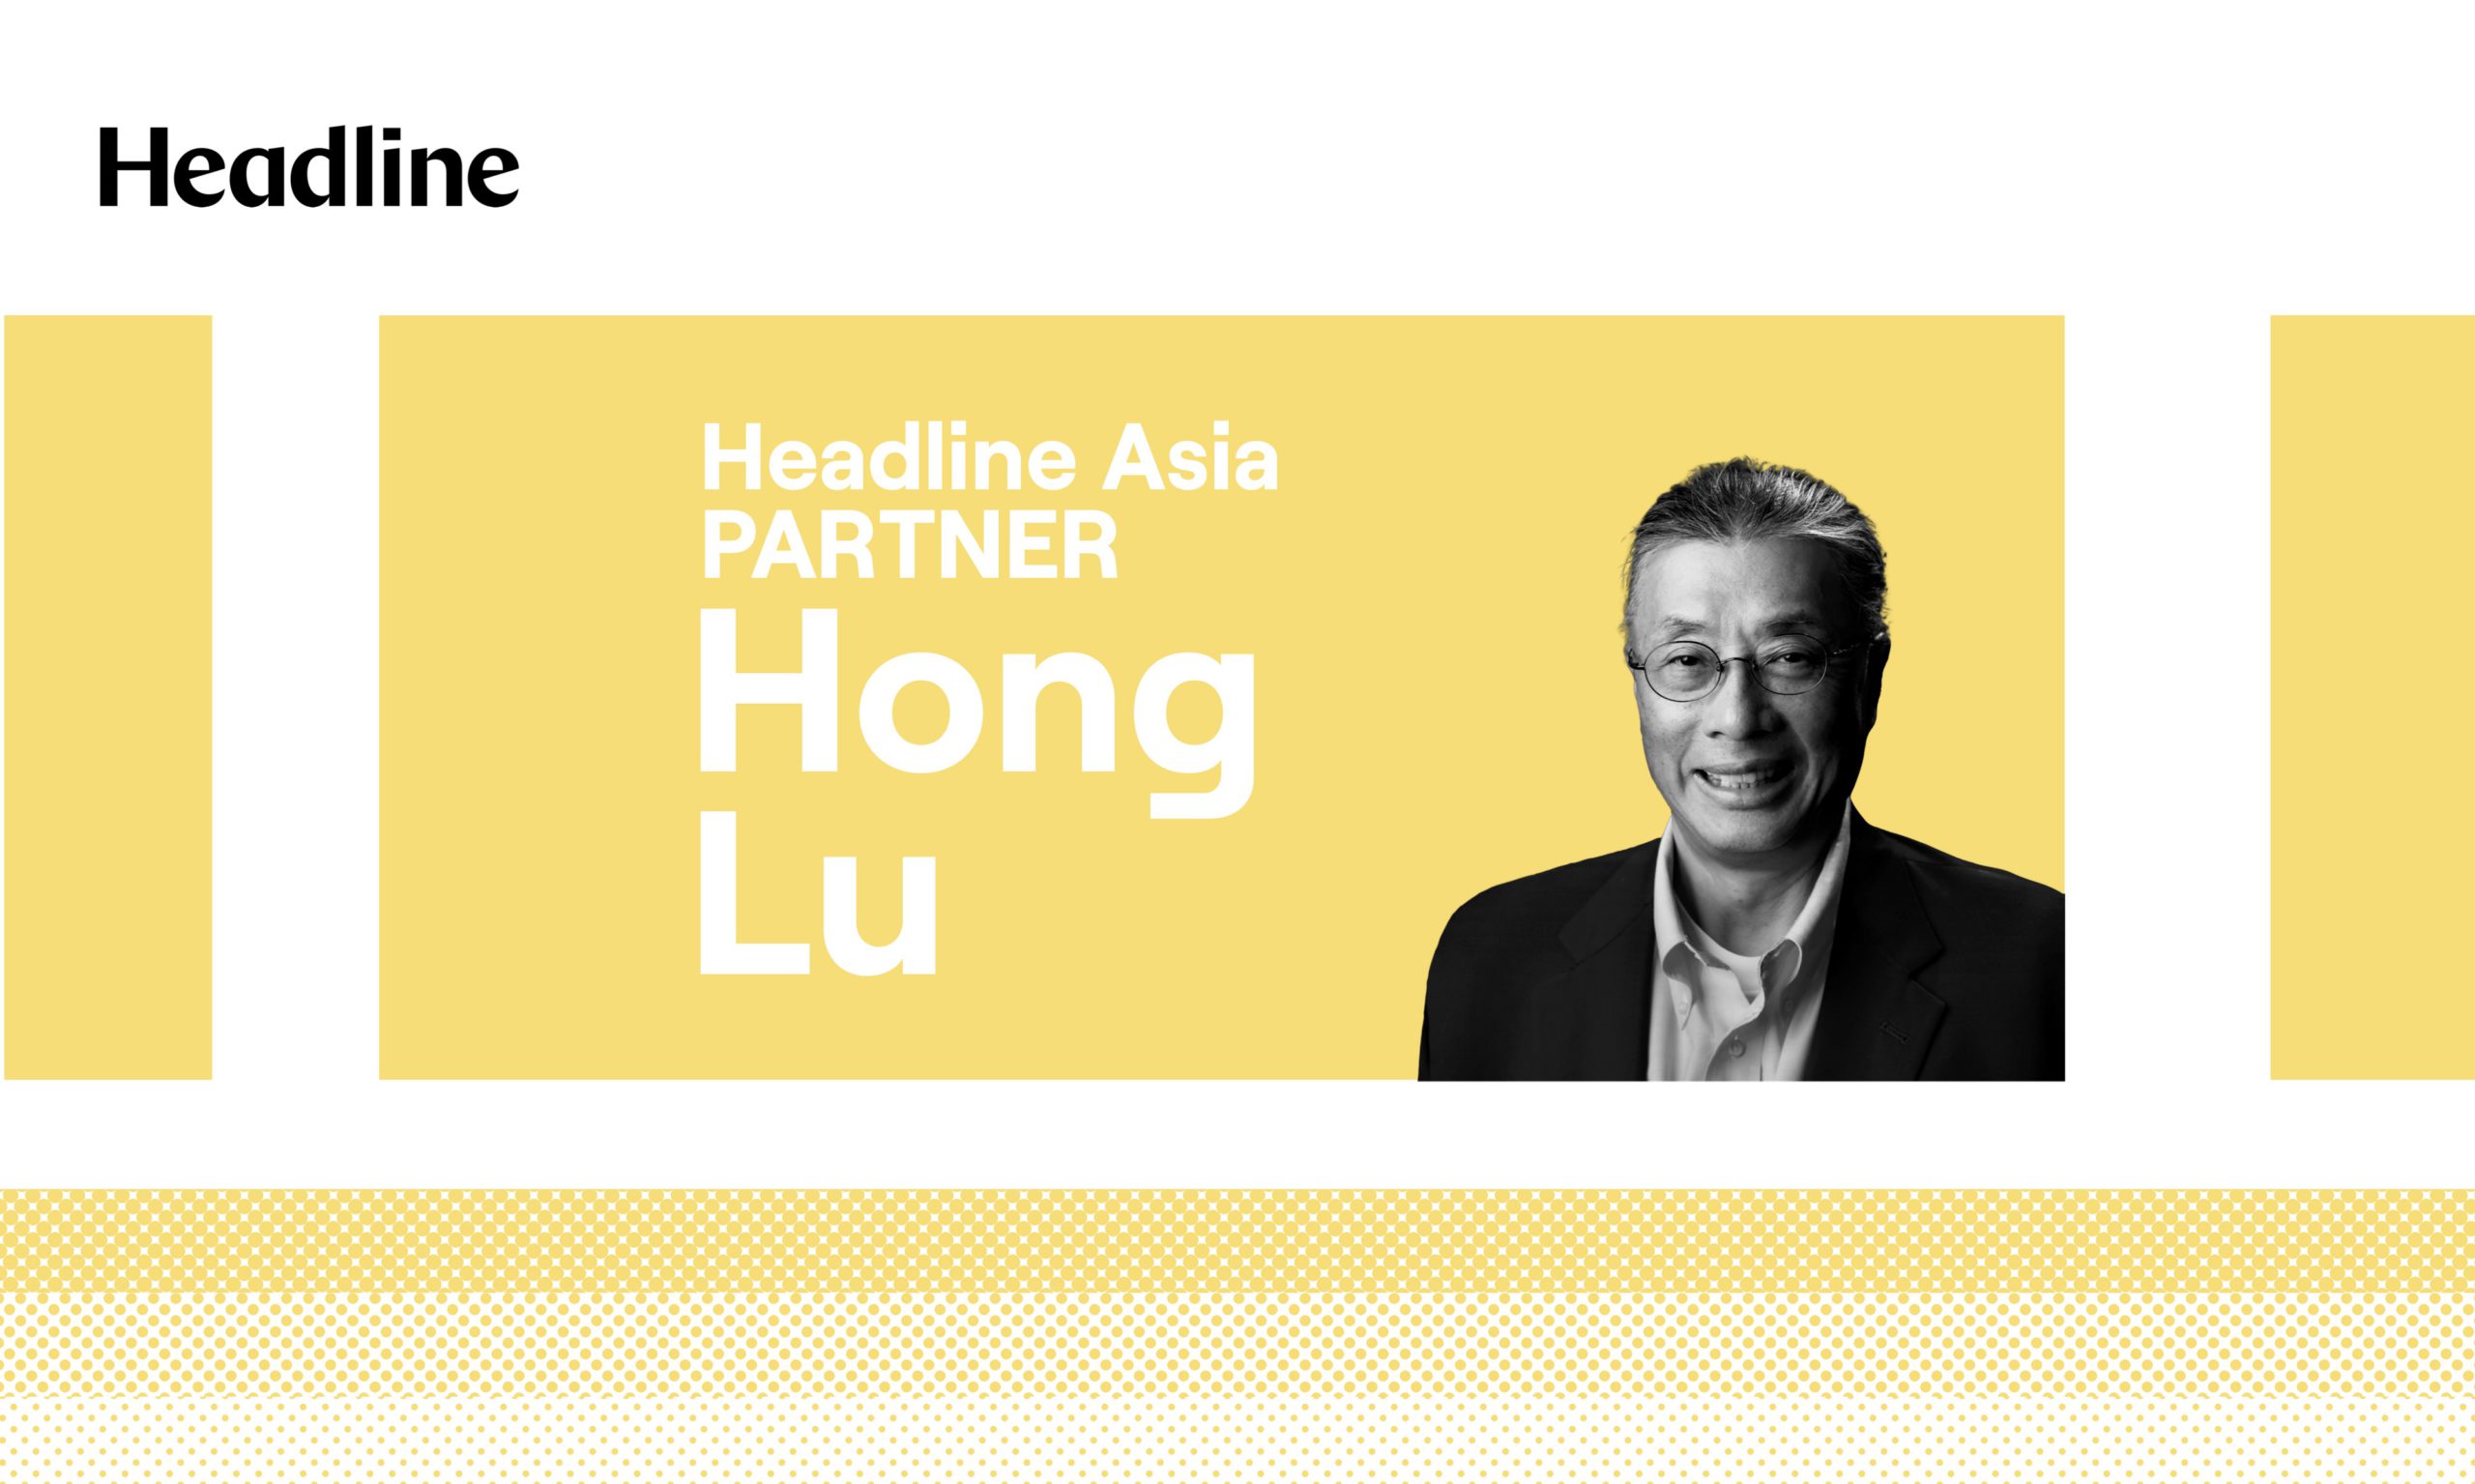 Headline Asia partner Hong Lu gives his best investment advice